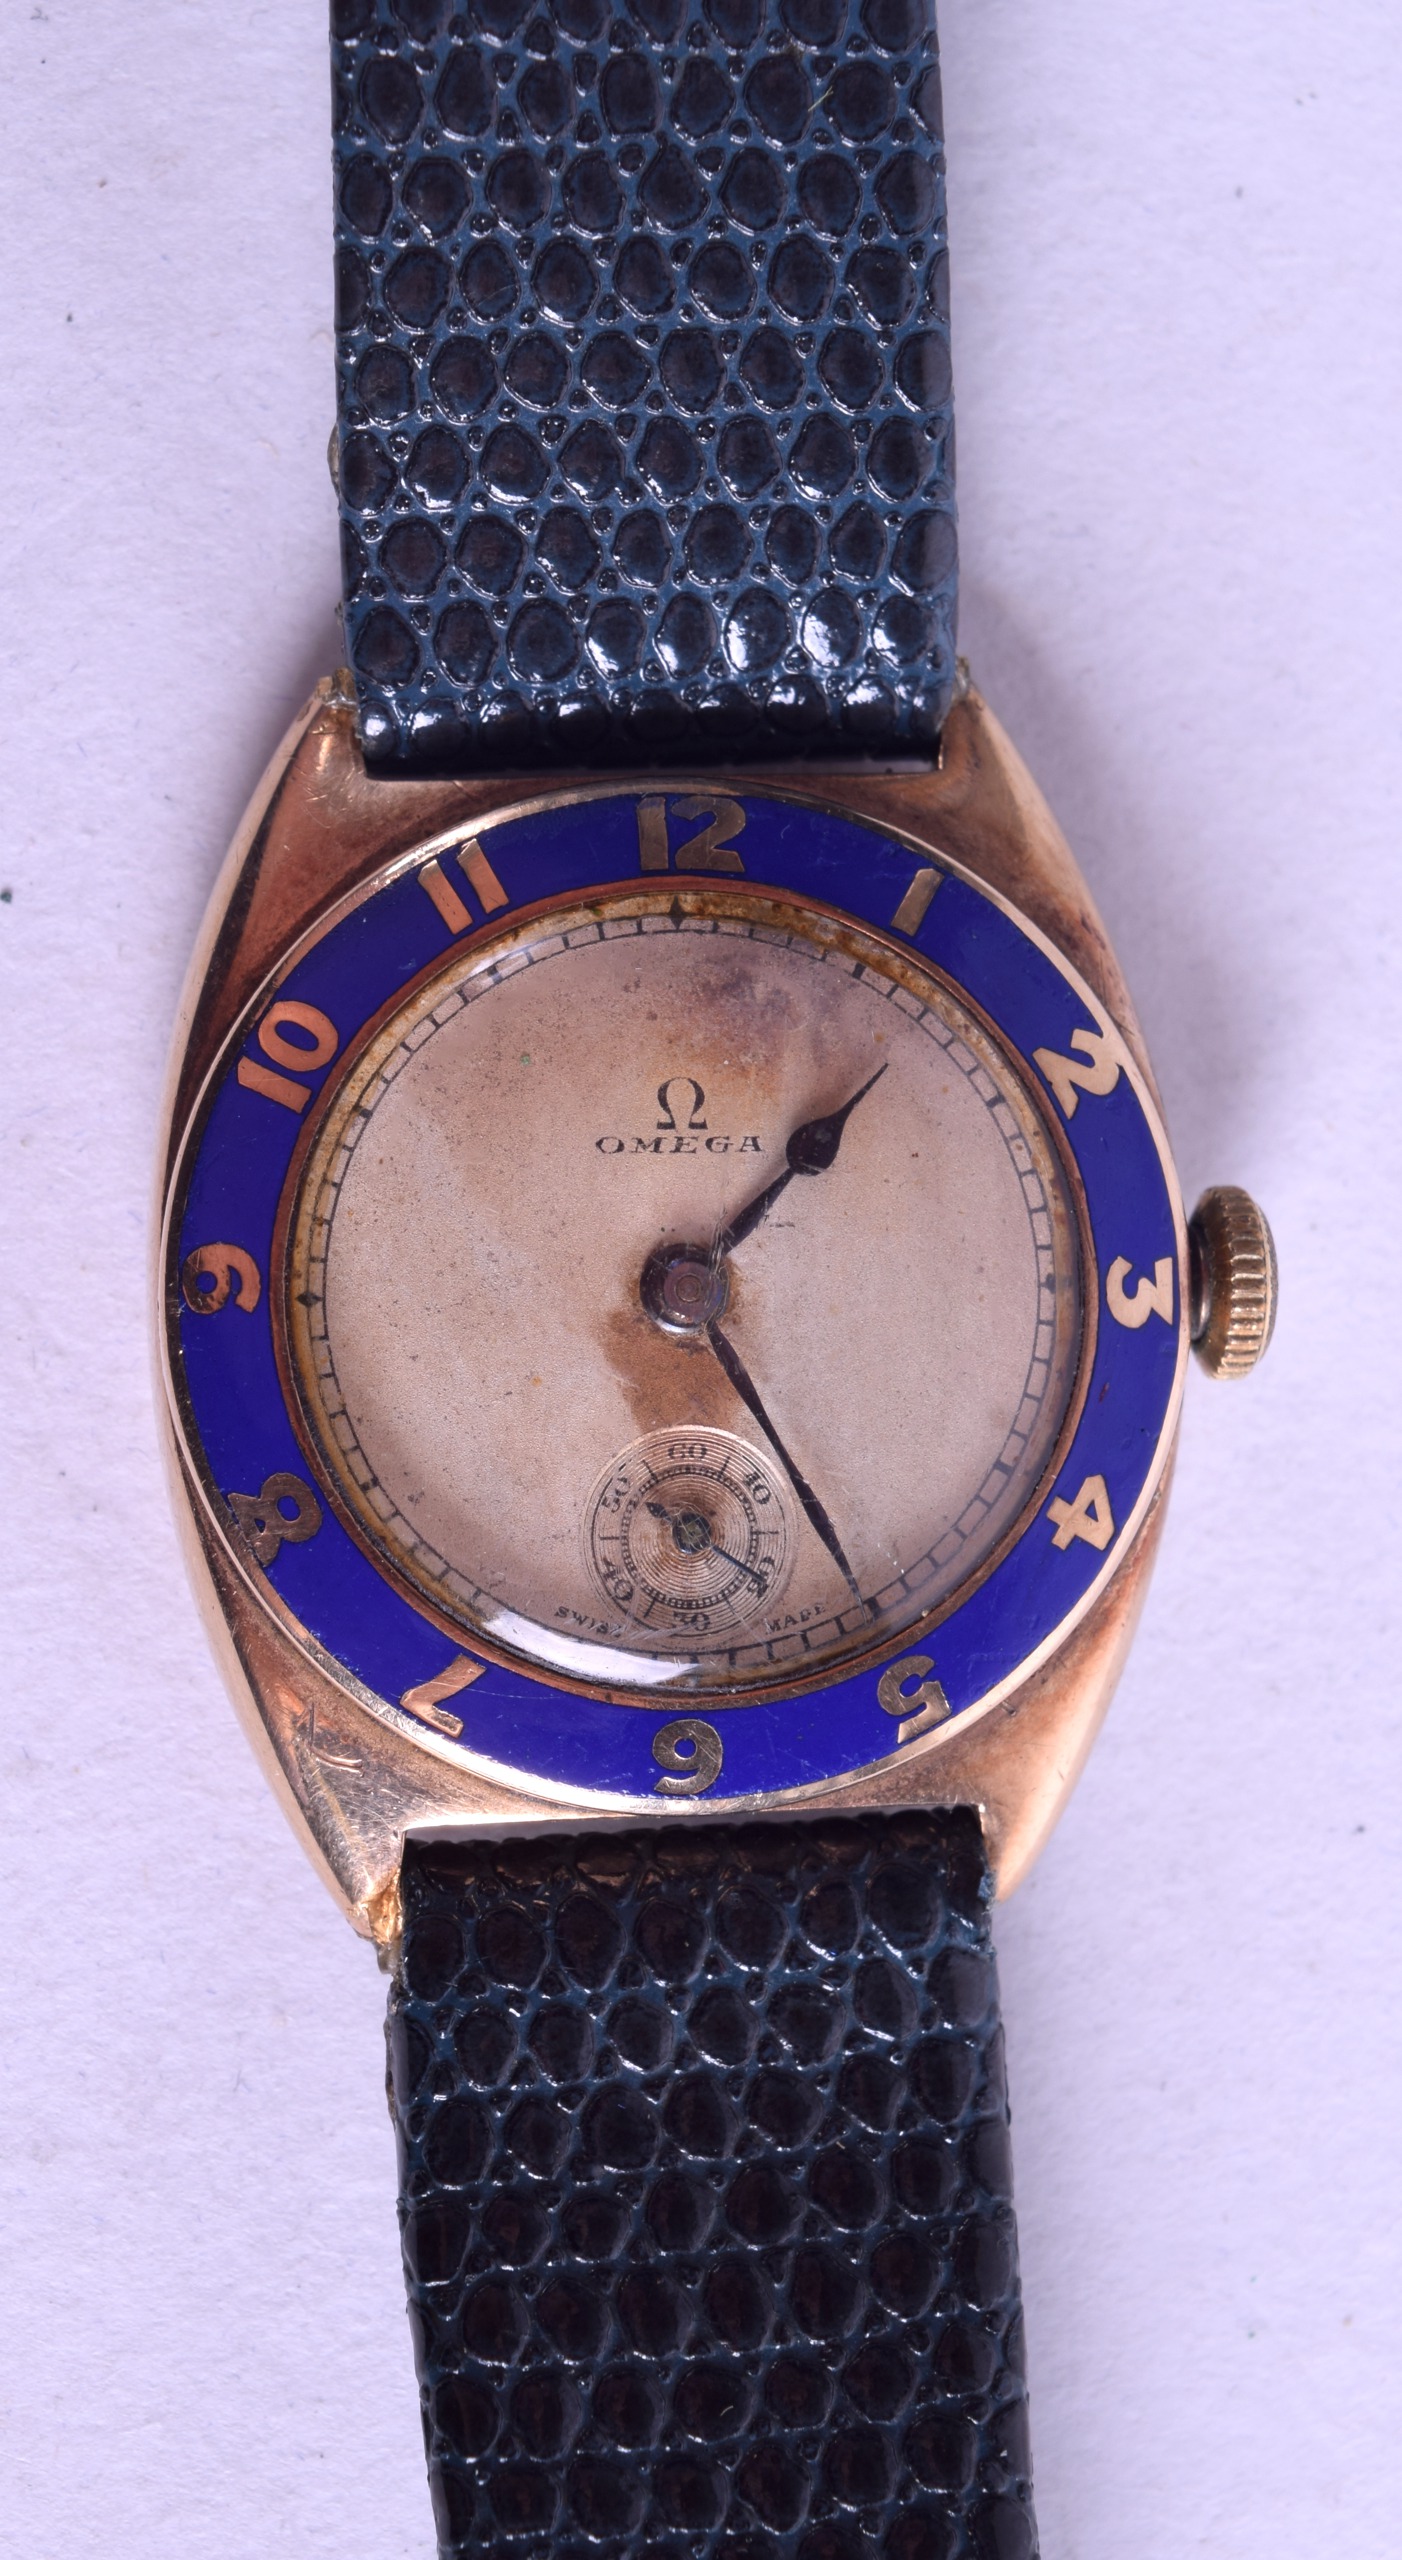 A RARE VINTAGE 9CT GOLD AND ENAMEL OMEGA WRISTWATCH with highly unusual blue enamelled decoration to